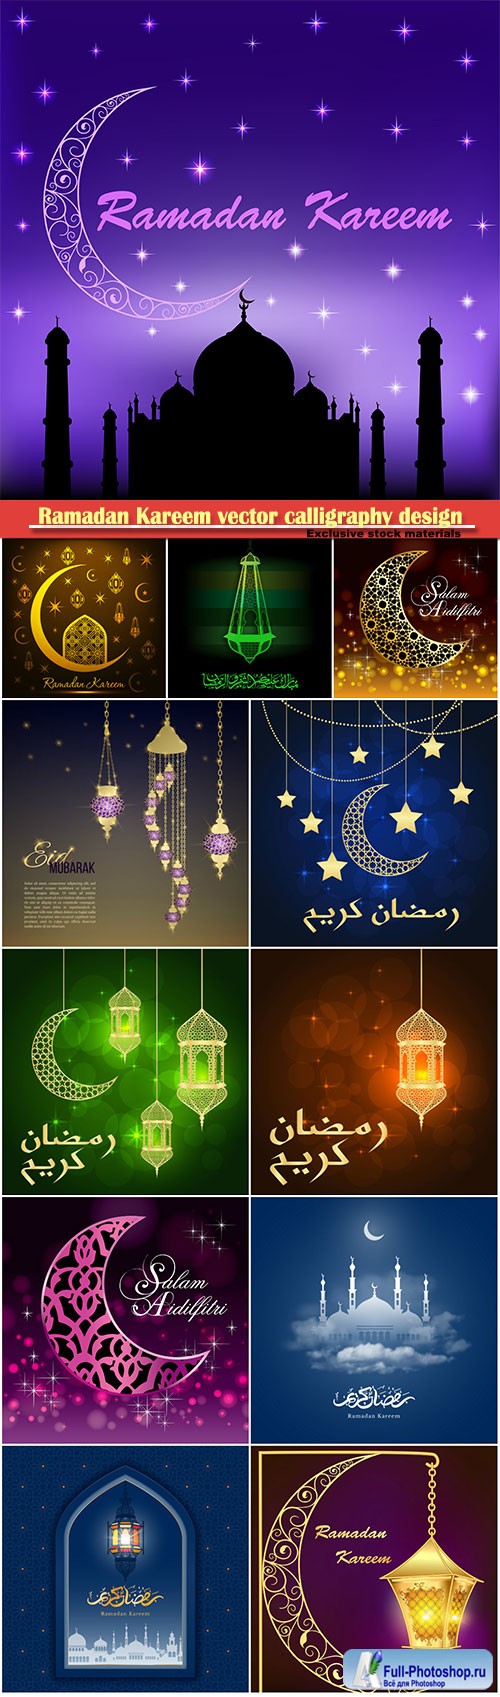 Ramadan Kareem vector calligraphy design with decorative floral pattern, mosque silhouette, crescent and glittering islamic background # 22